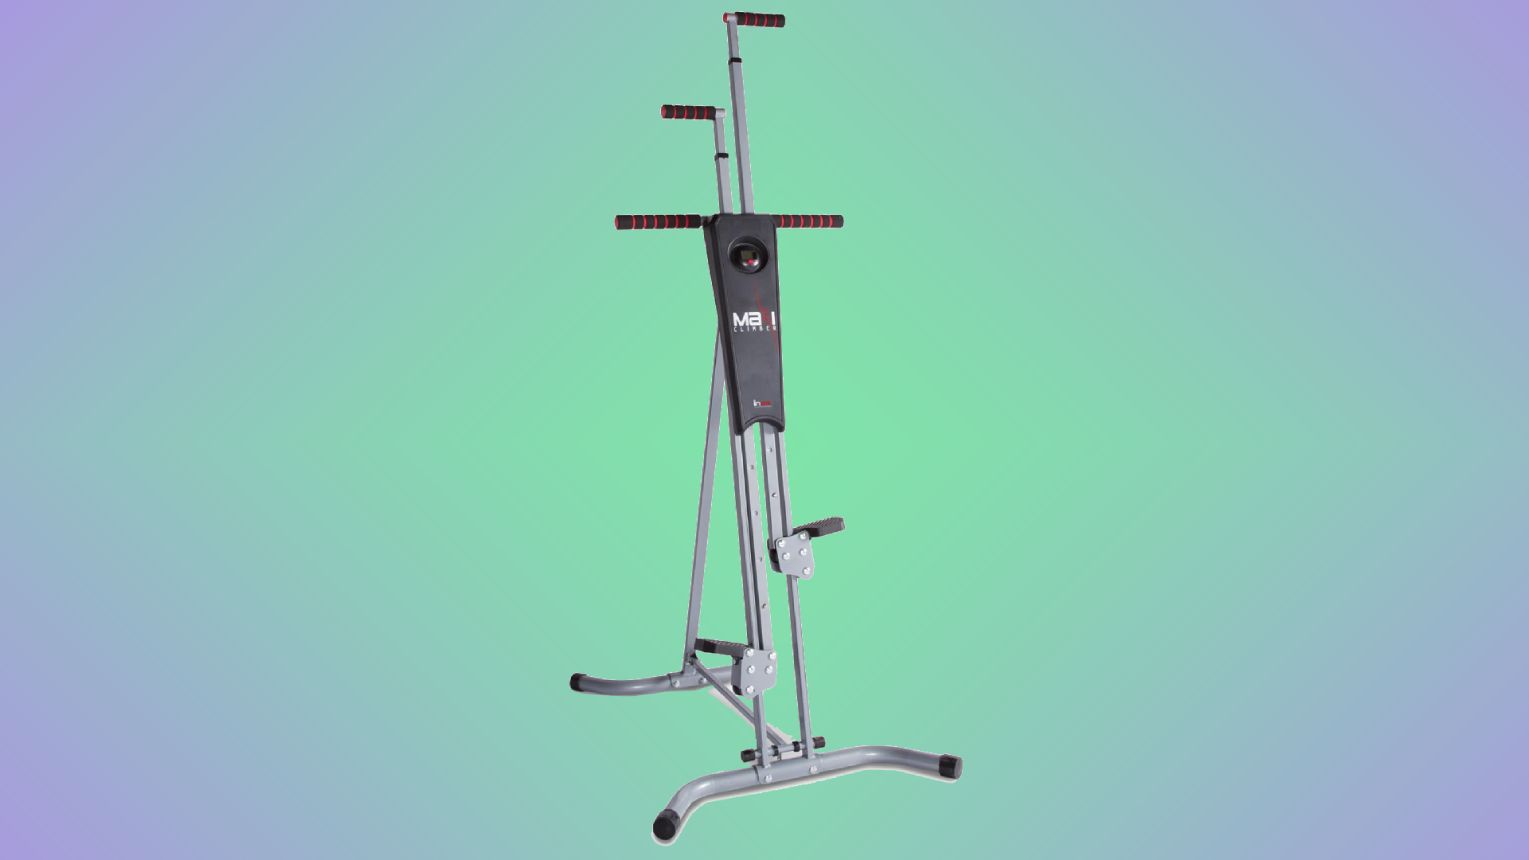 MaxiClimber Classic product image of a grey vertical climber machine with black and red details.